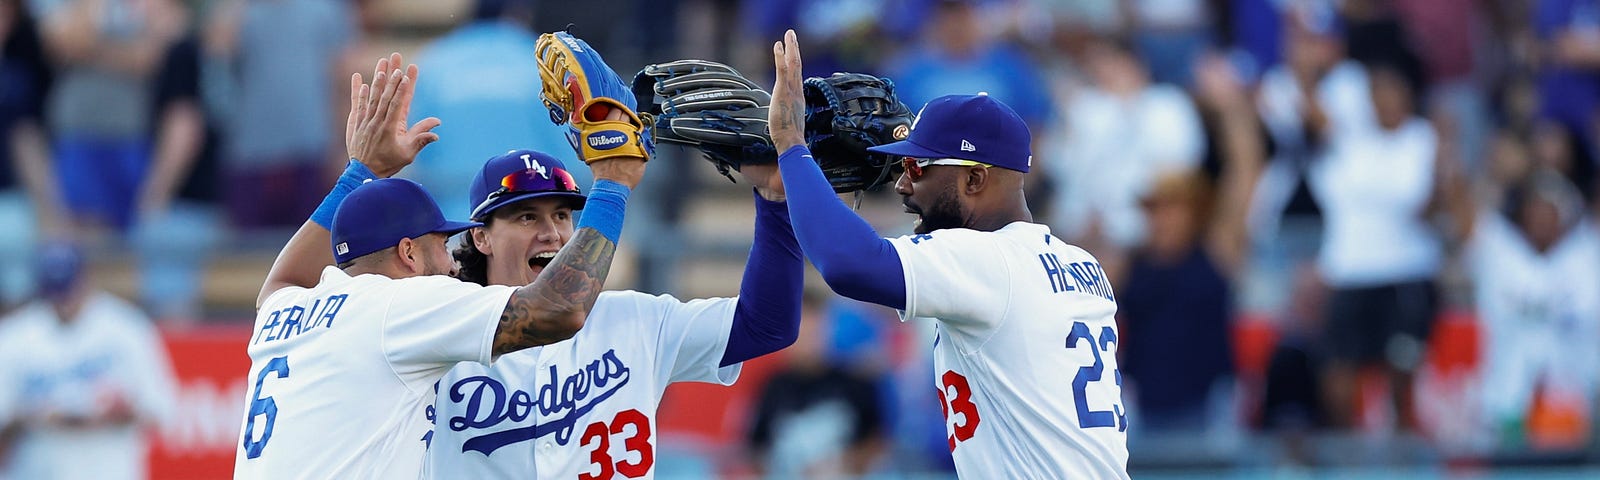 After a slow start, scorching Peralta has provided Dodgers with consistency, by Cary Osborne